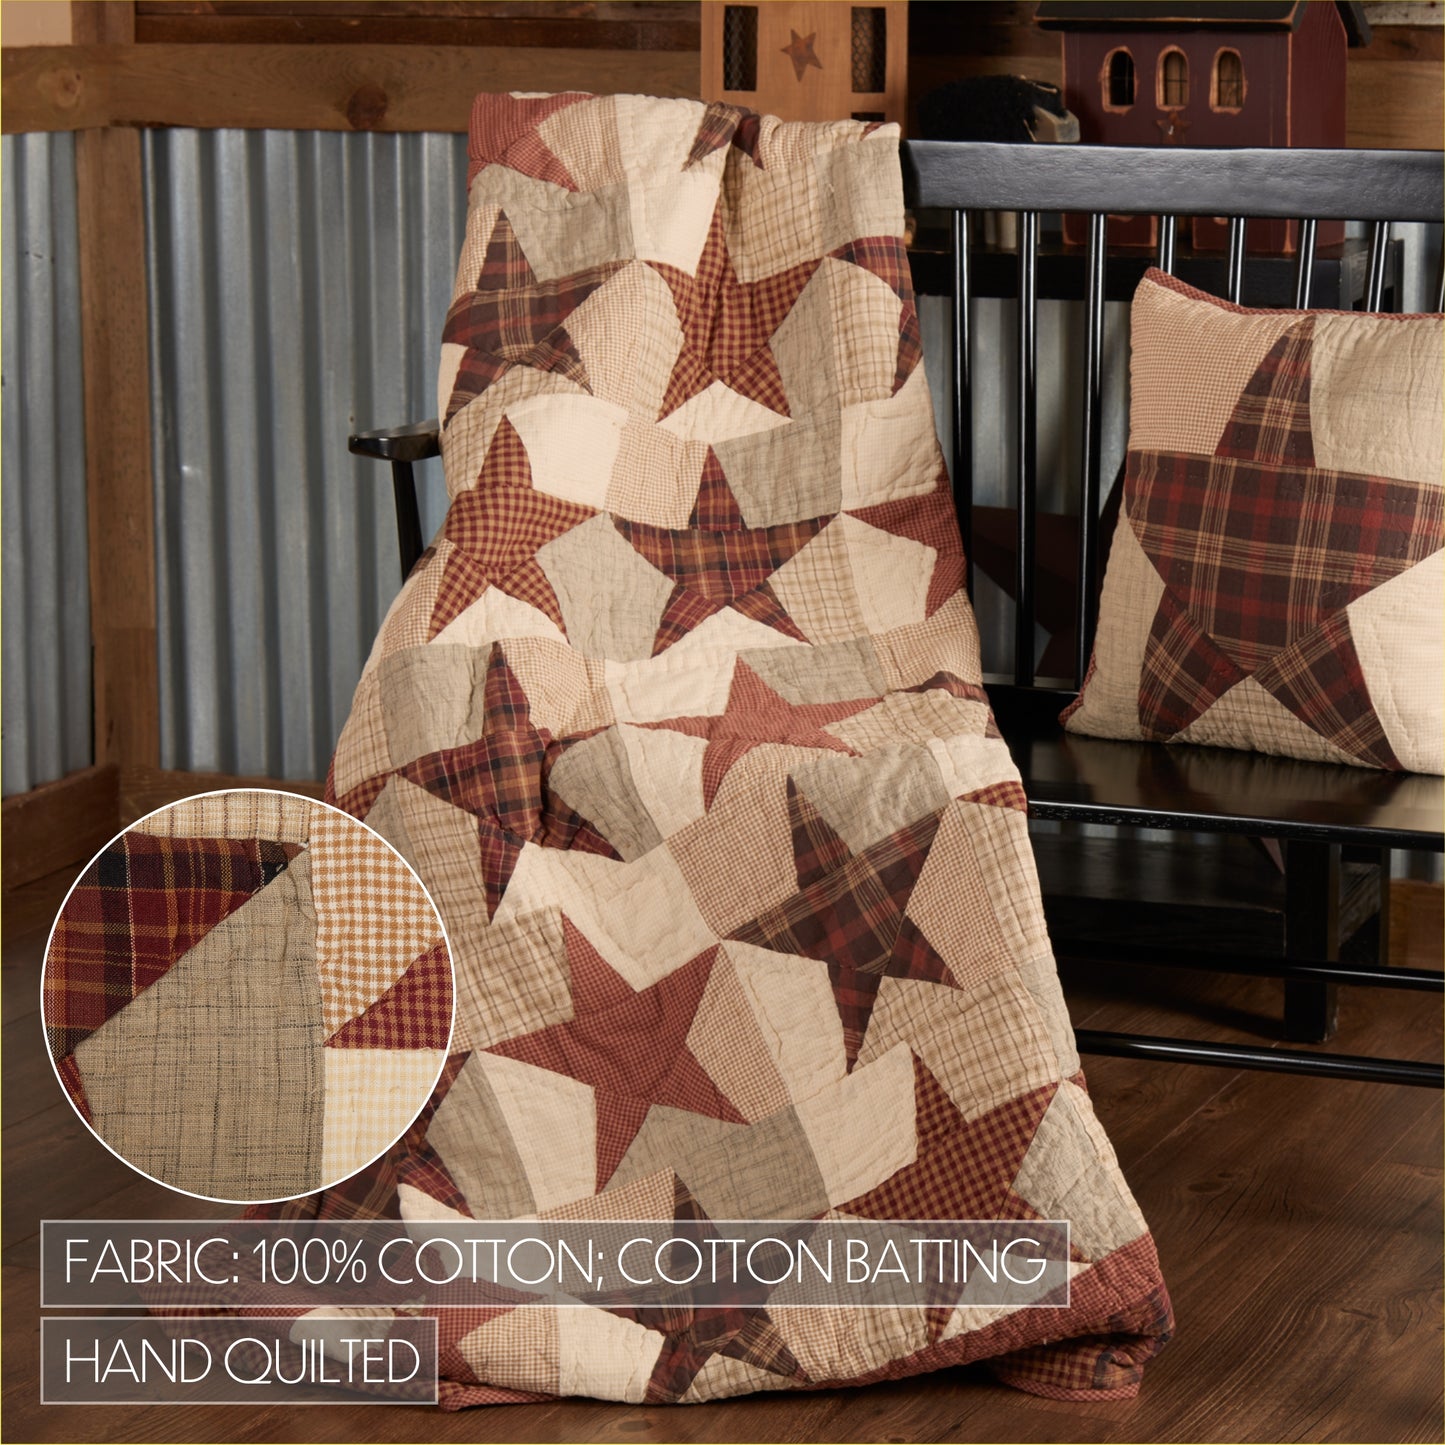 19977-Abilene-Star-Quilted-Throw-70x55-image-2